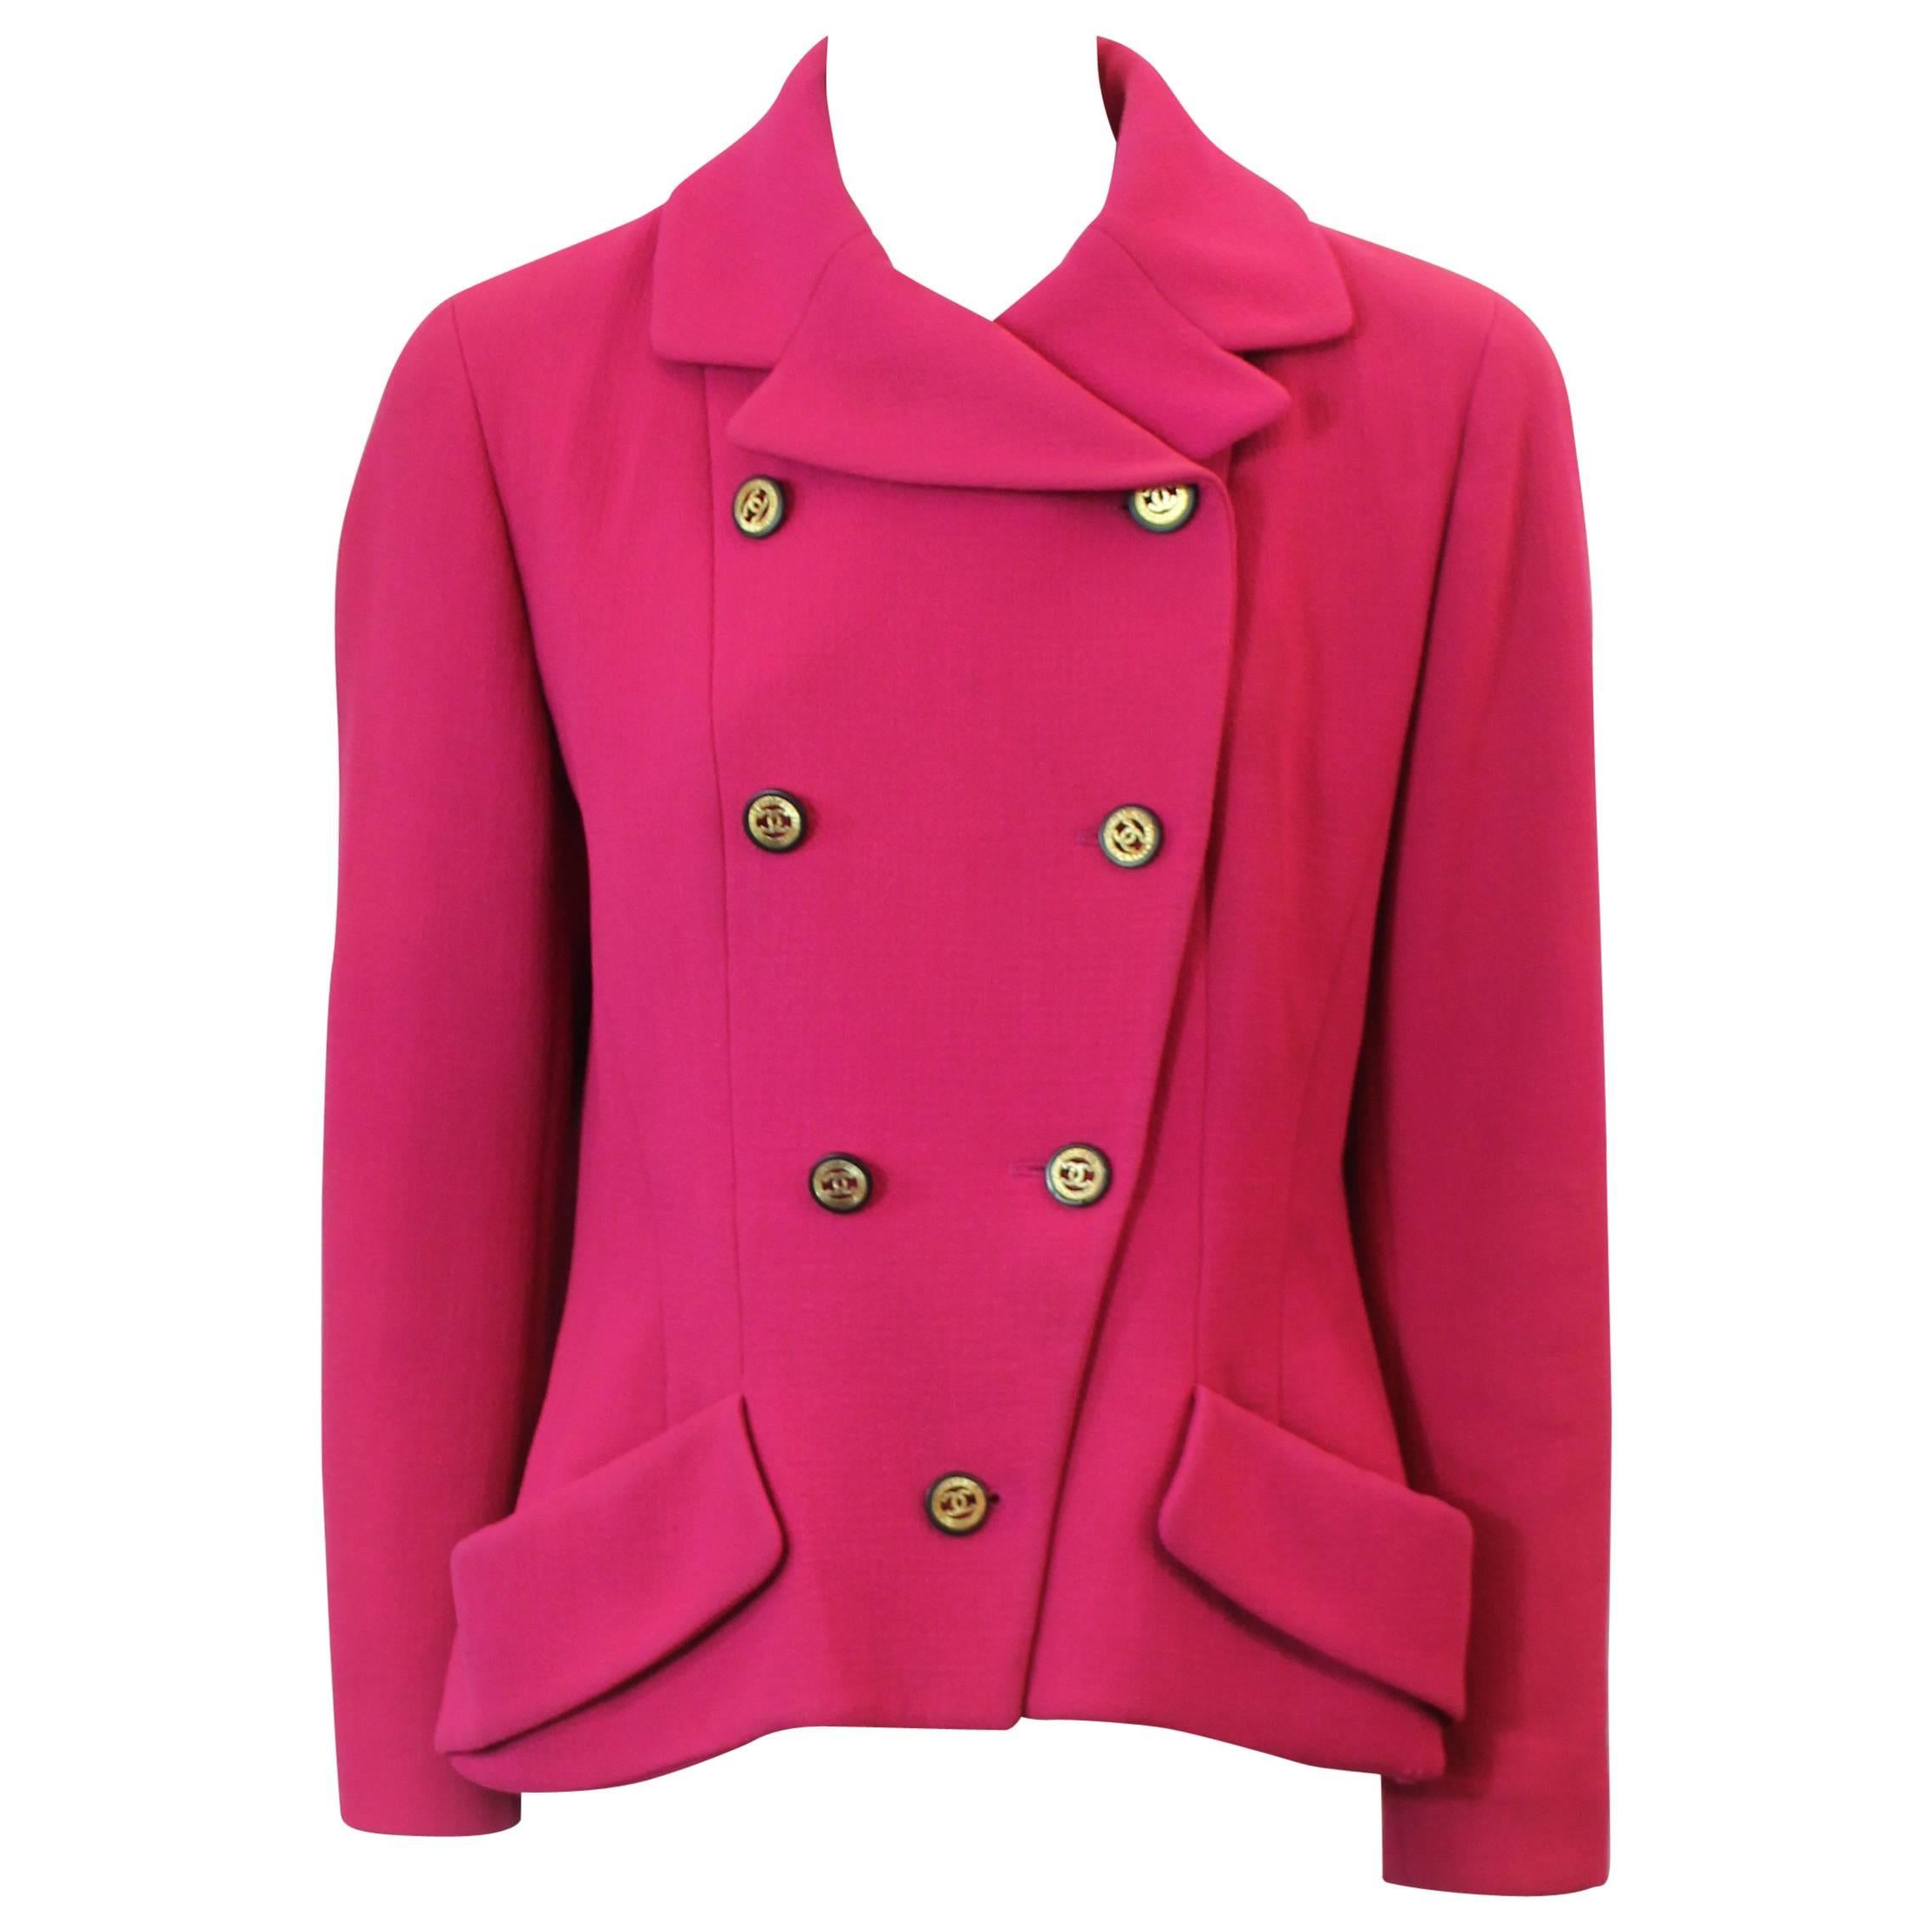 Chanel Fuchsia Double Breasted Wool Jacket with "CC" Buttons - 38 - 1980's